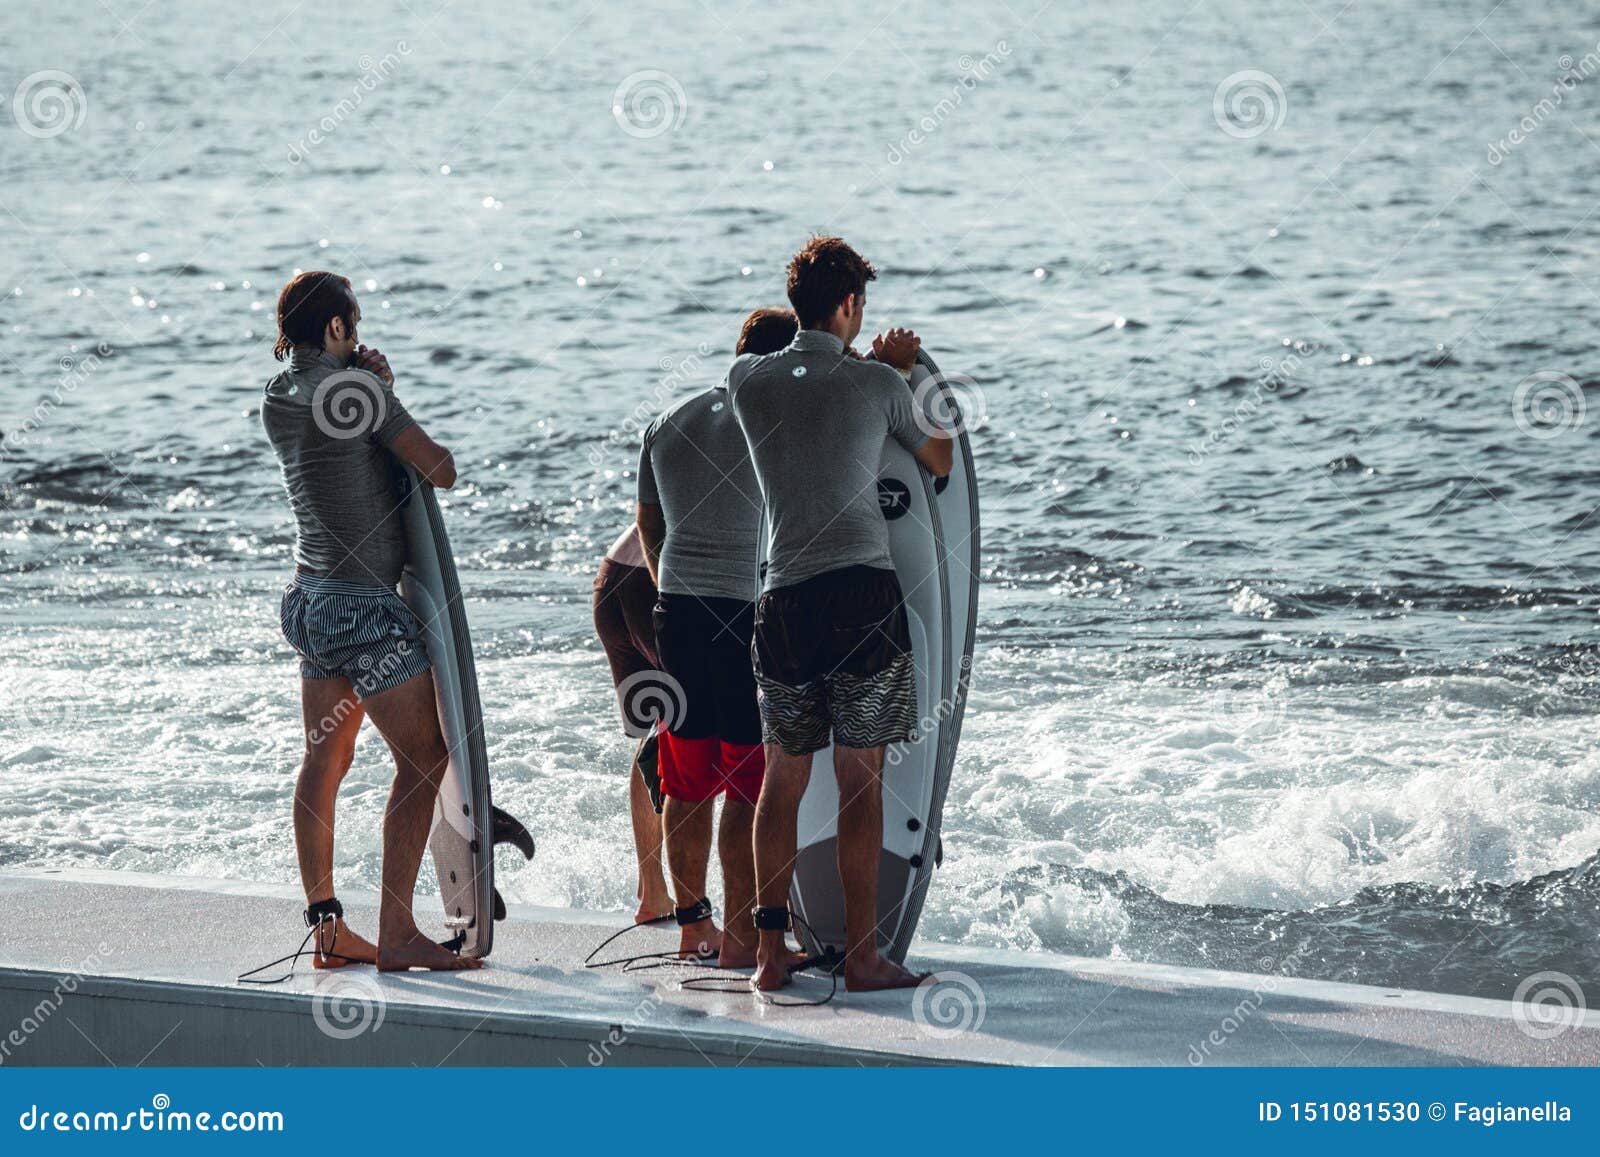 Milano Italy 20 June 2019 Group Of Young Surfers With